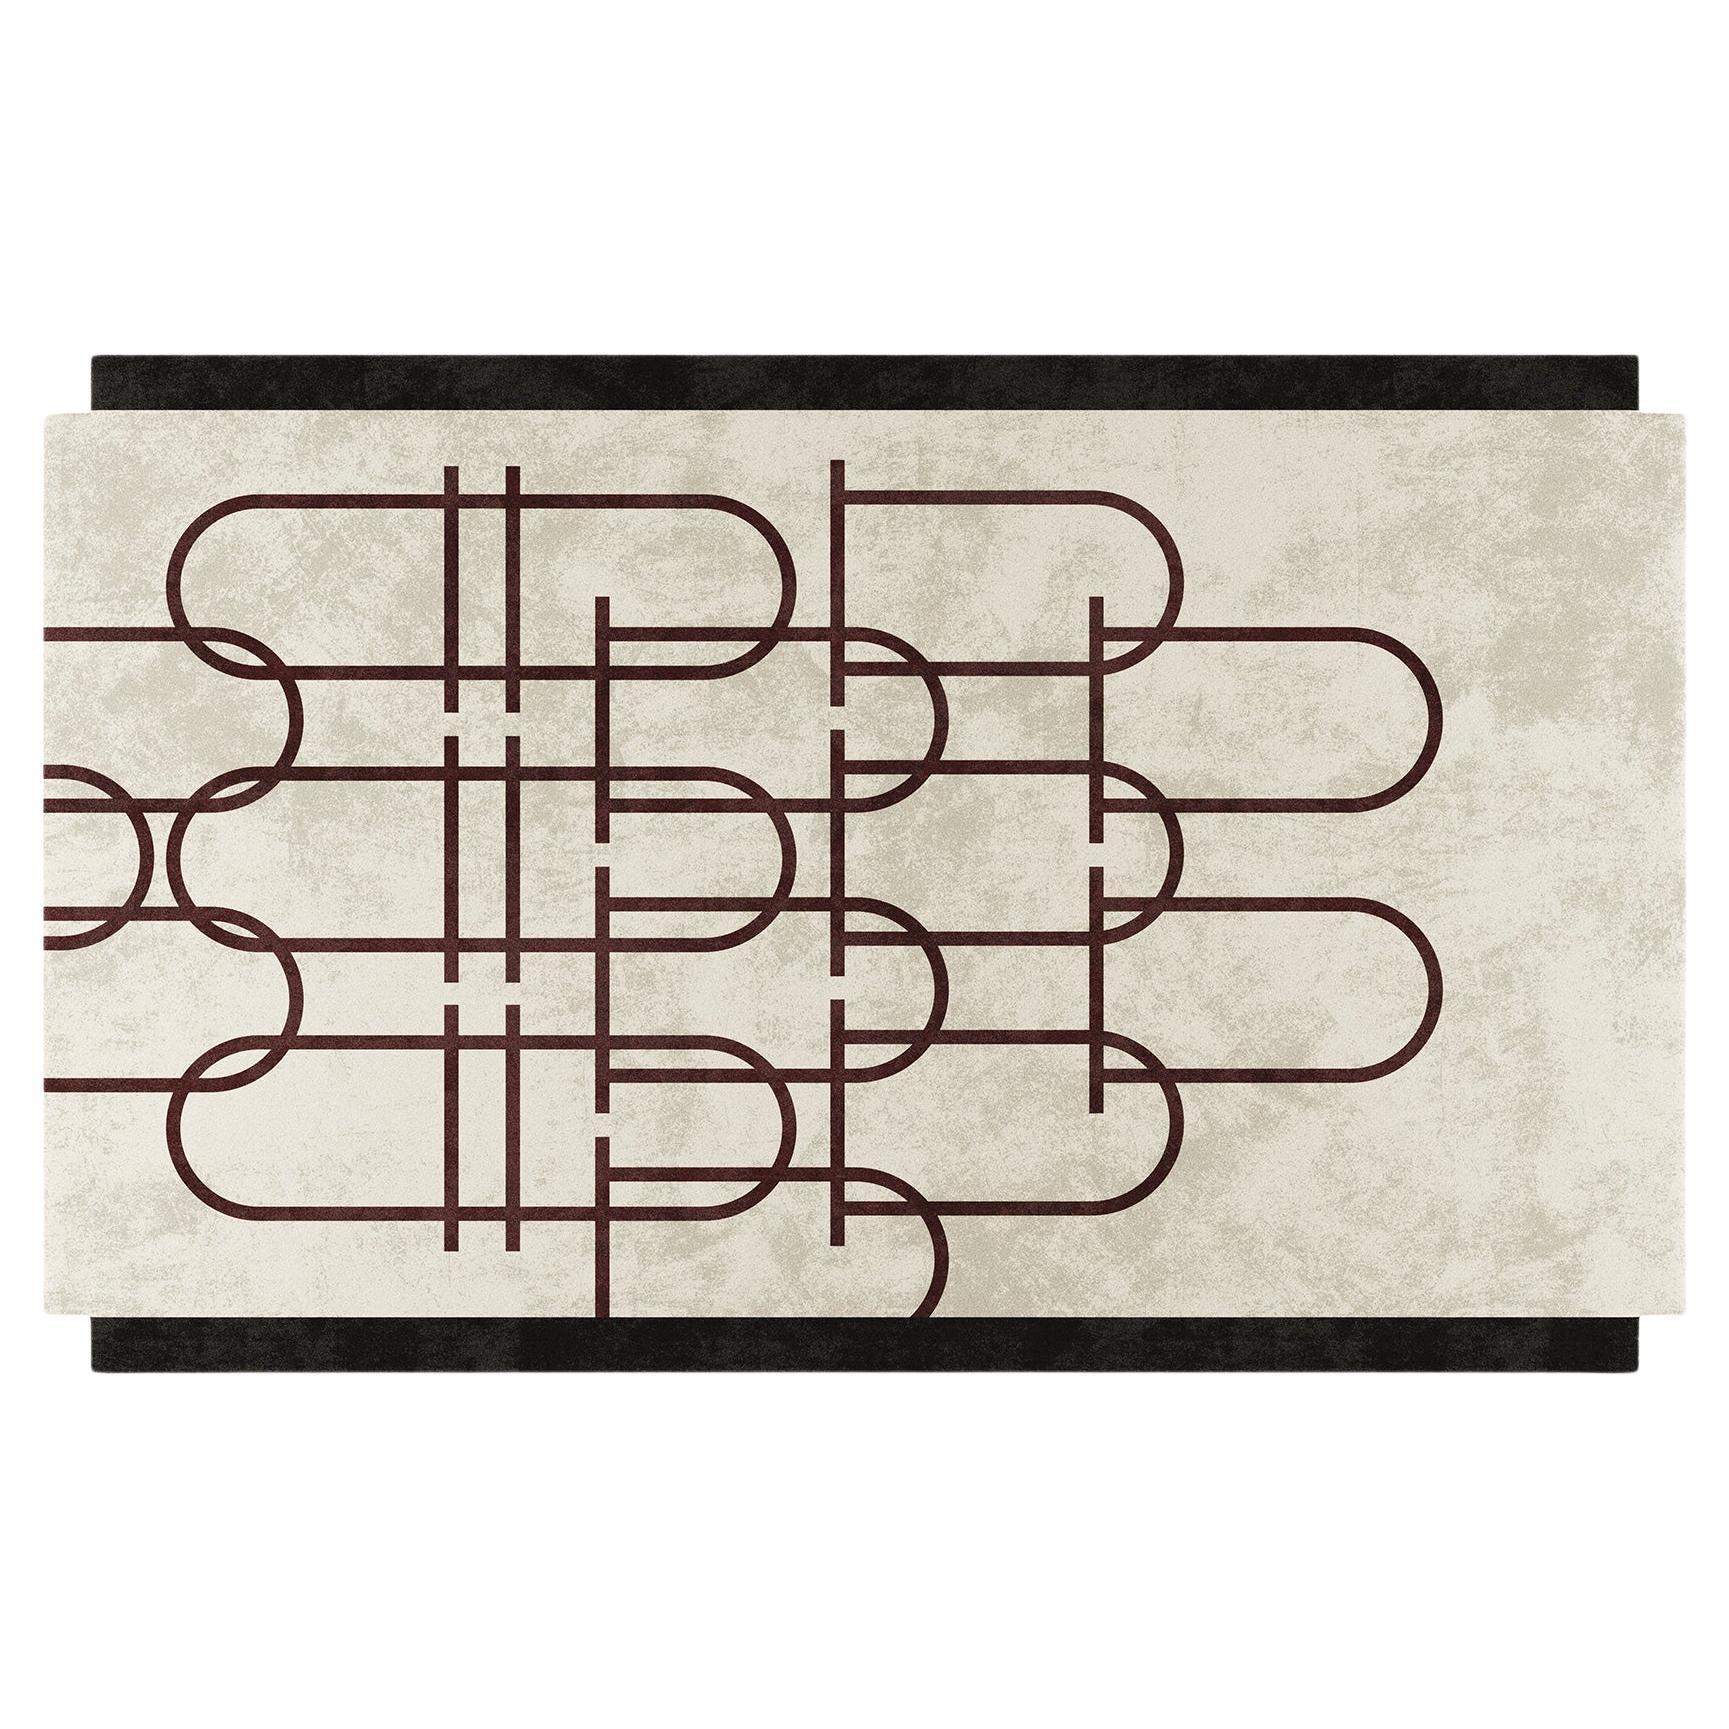 Customizable Rug with Abstract GeomtrIc Patterns, Beige and Black Details